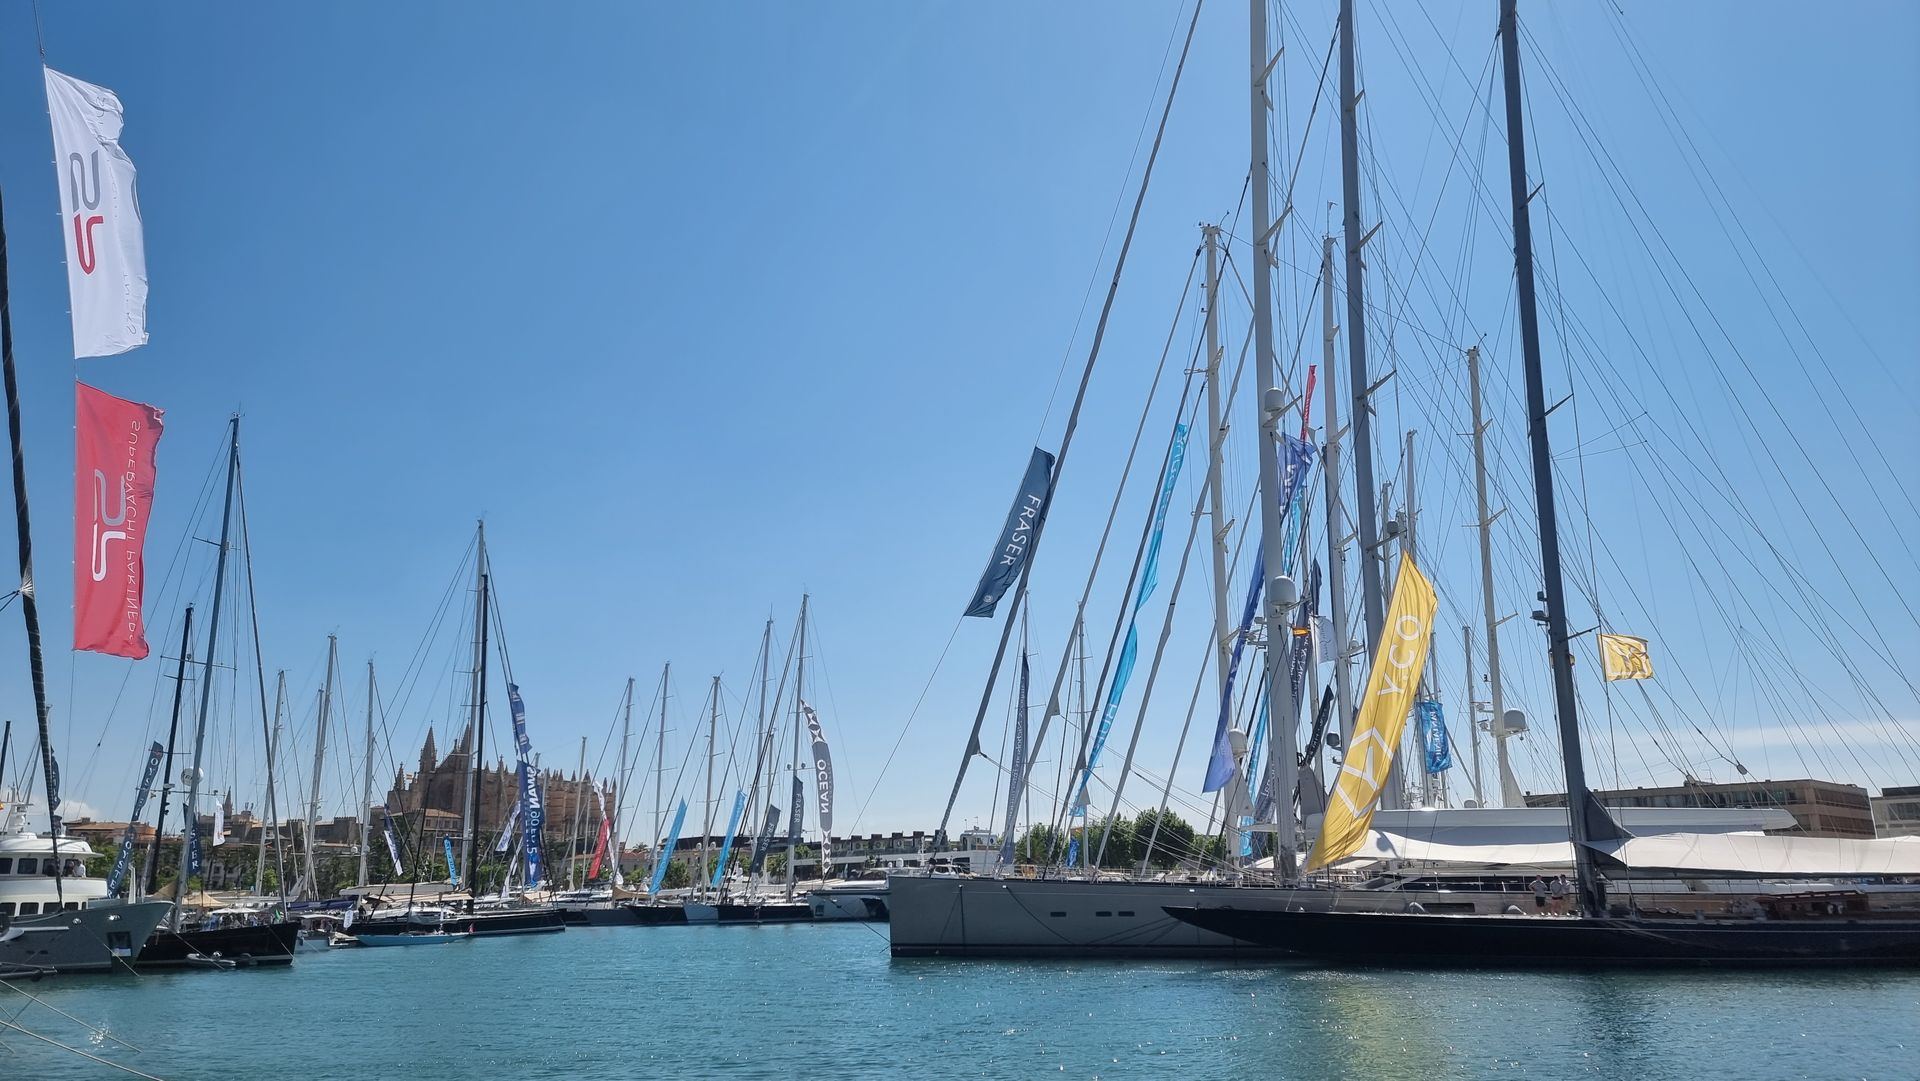 Some vessels in the Palma Superyacht Village 2022